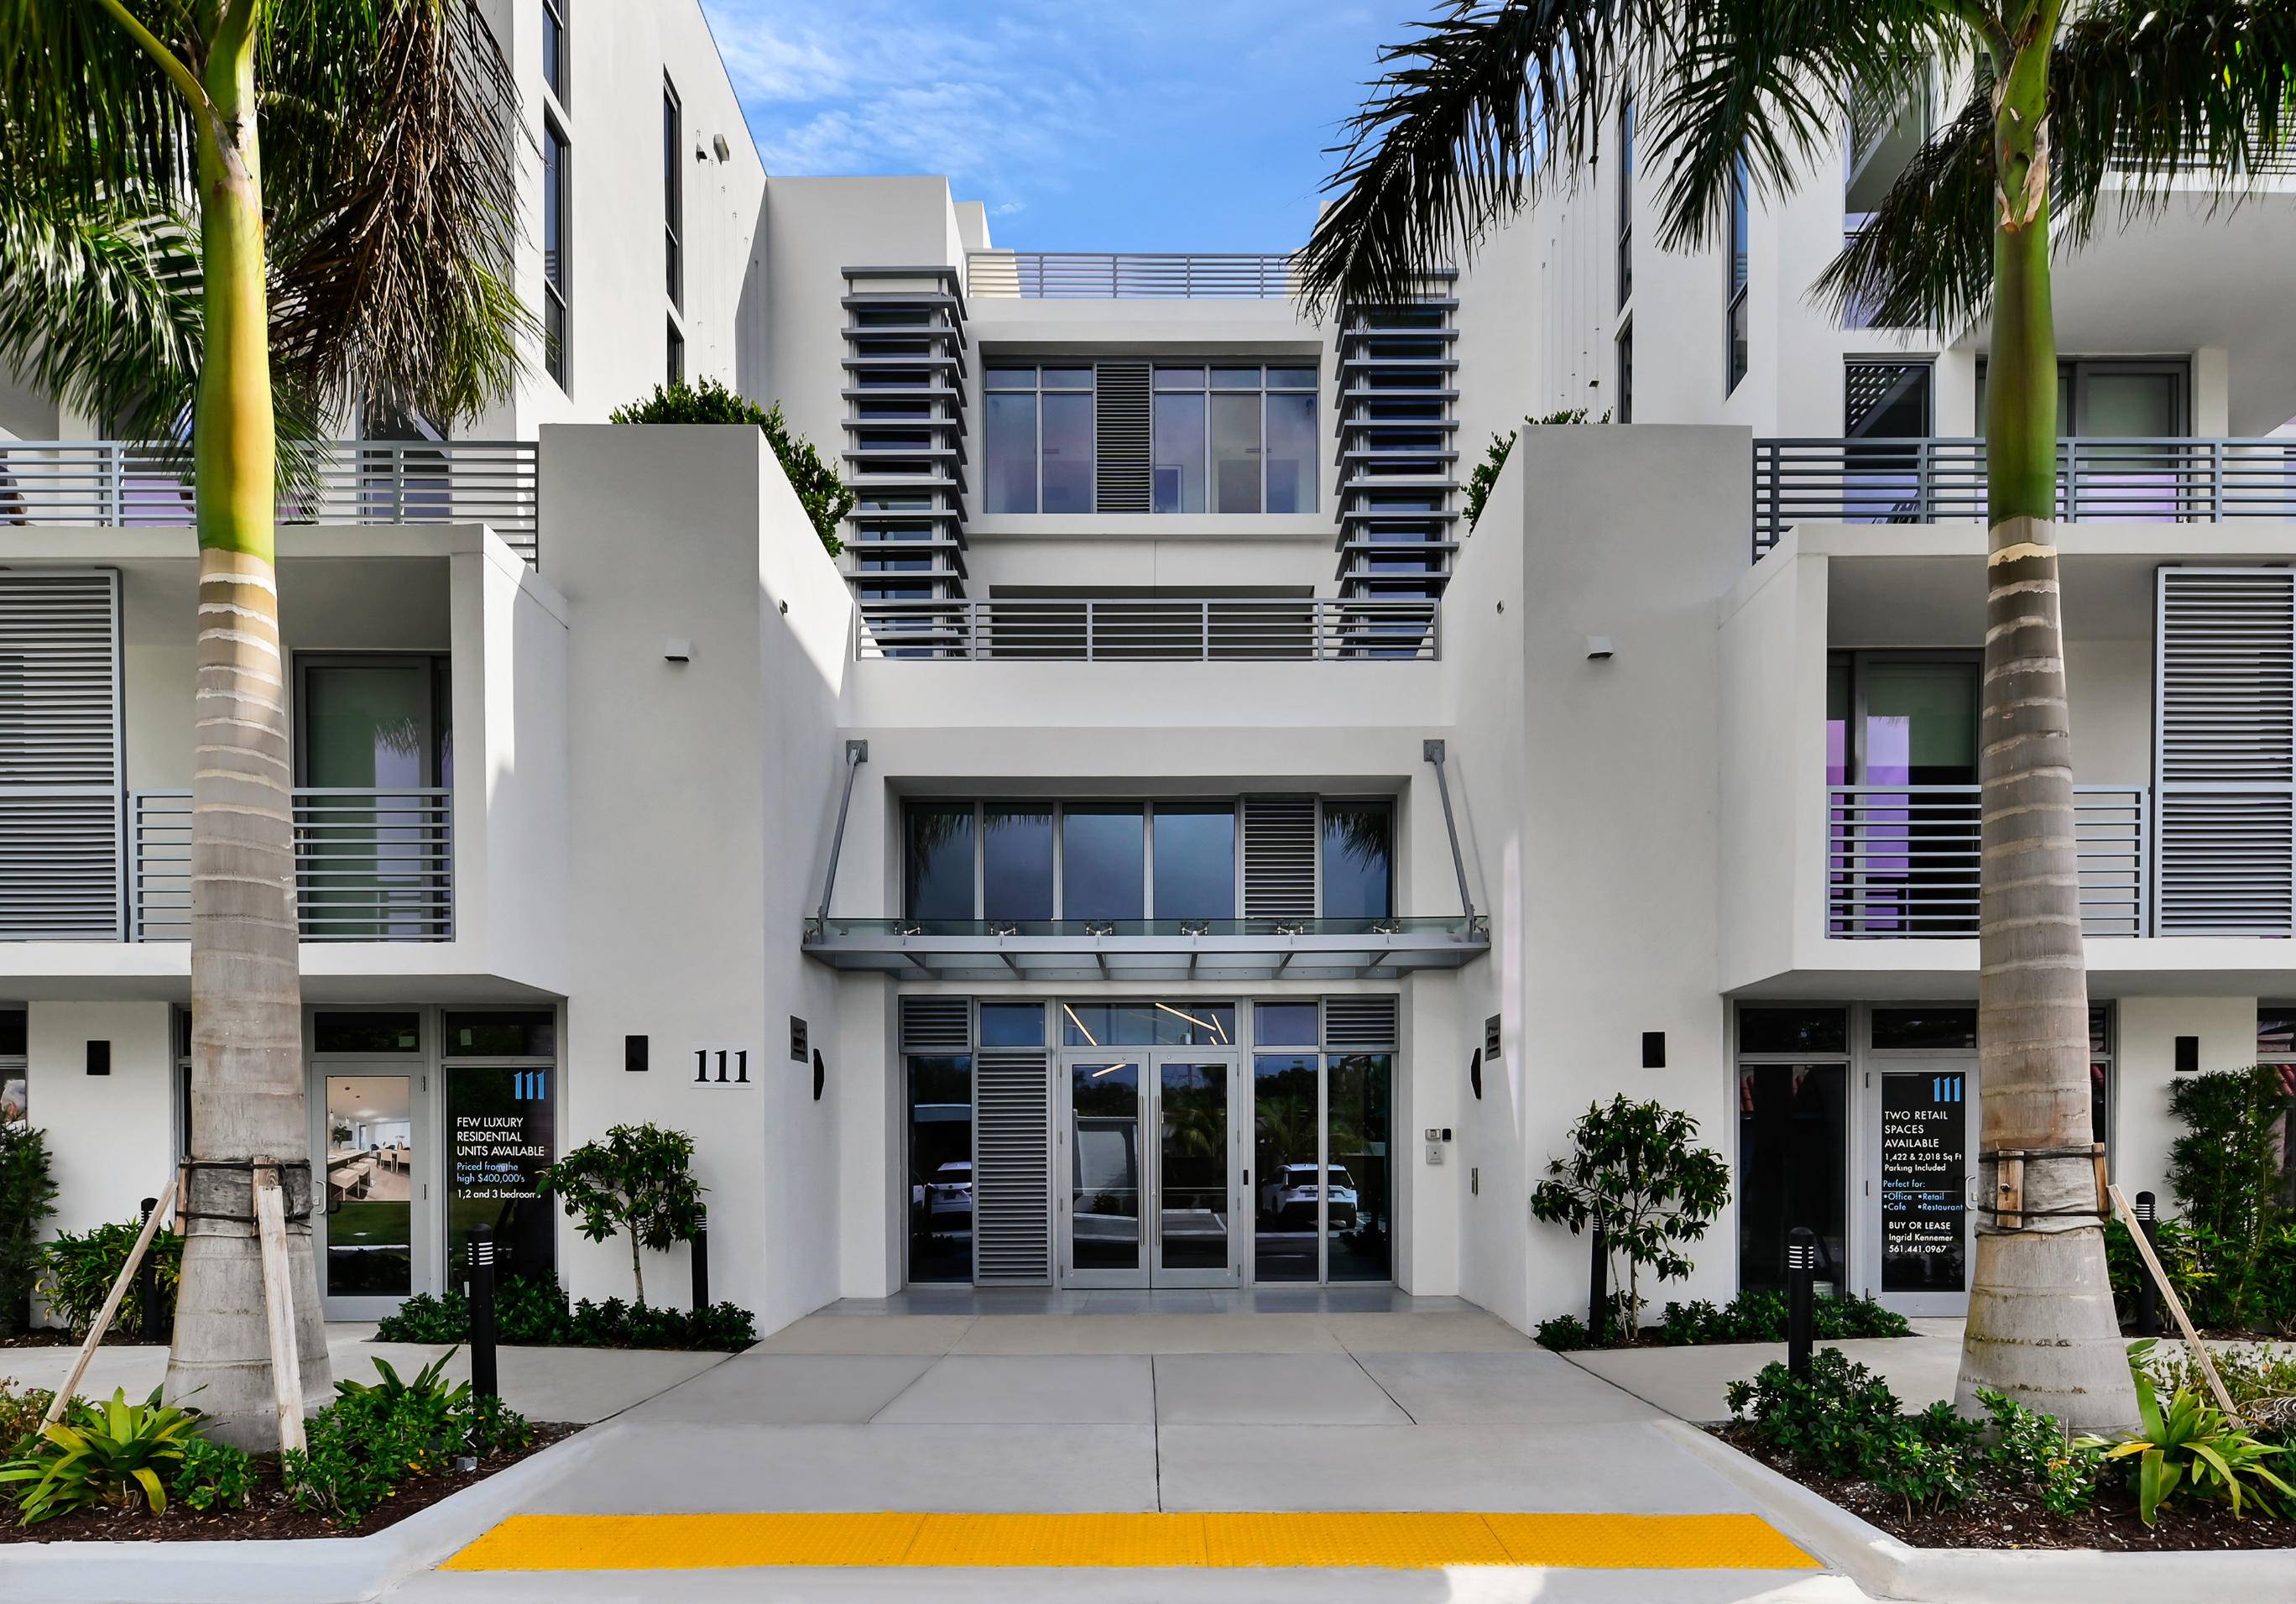 Stunning urban living in the heart of downtown Delray Beach, steps away from Atlantic Ave, 1 mile to the beach.